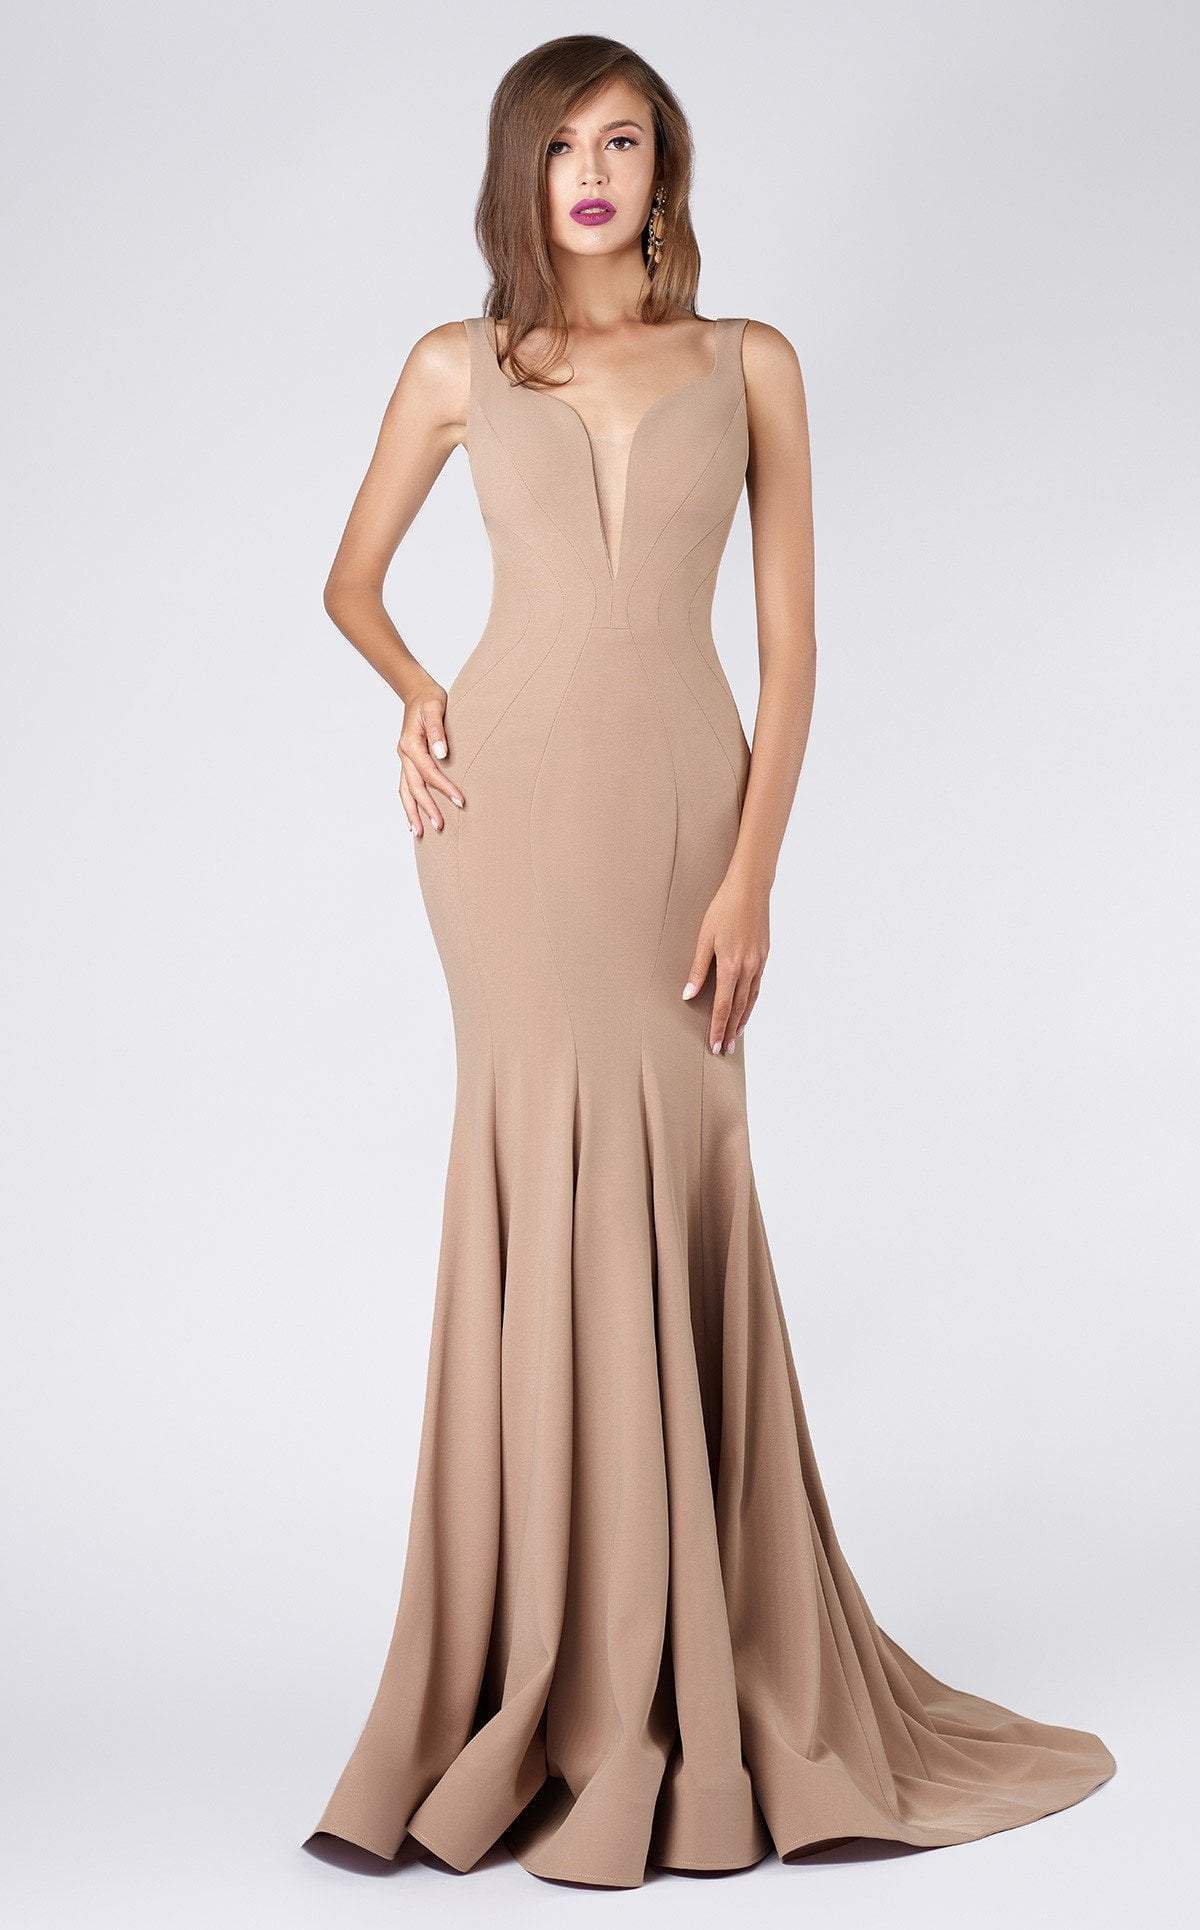 MNM COUTURE - M0008 Illusion V Neck Crepe Trumpet Evening Gown Special Occasion Dress 0 / Mocha